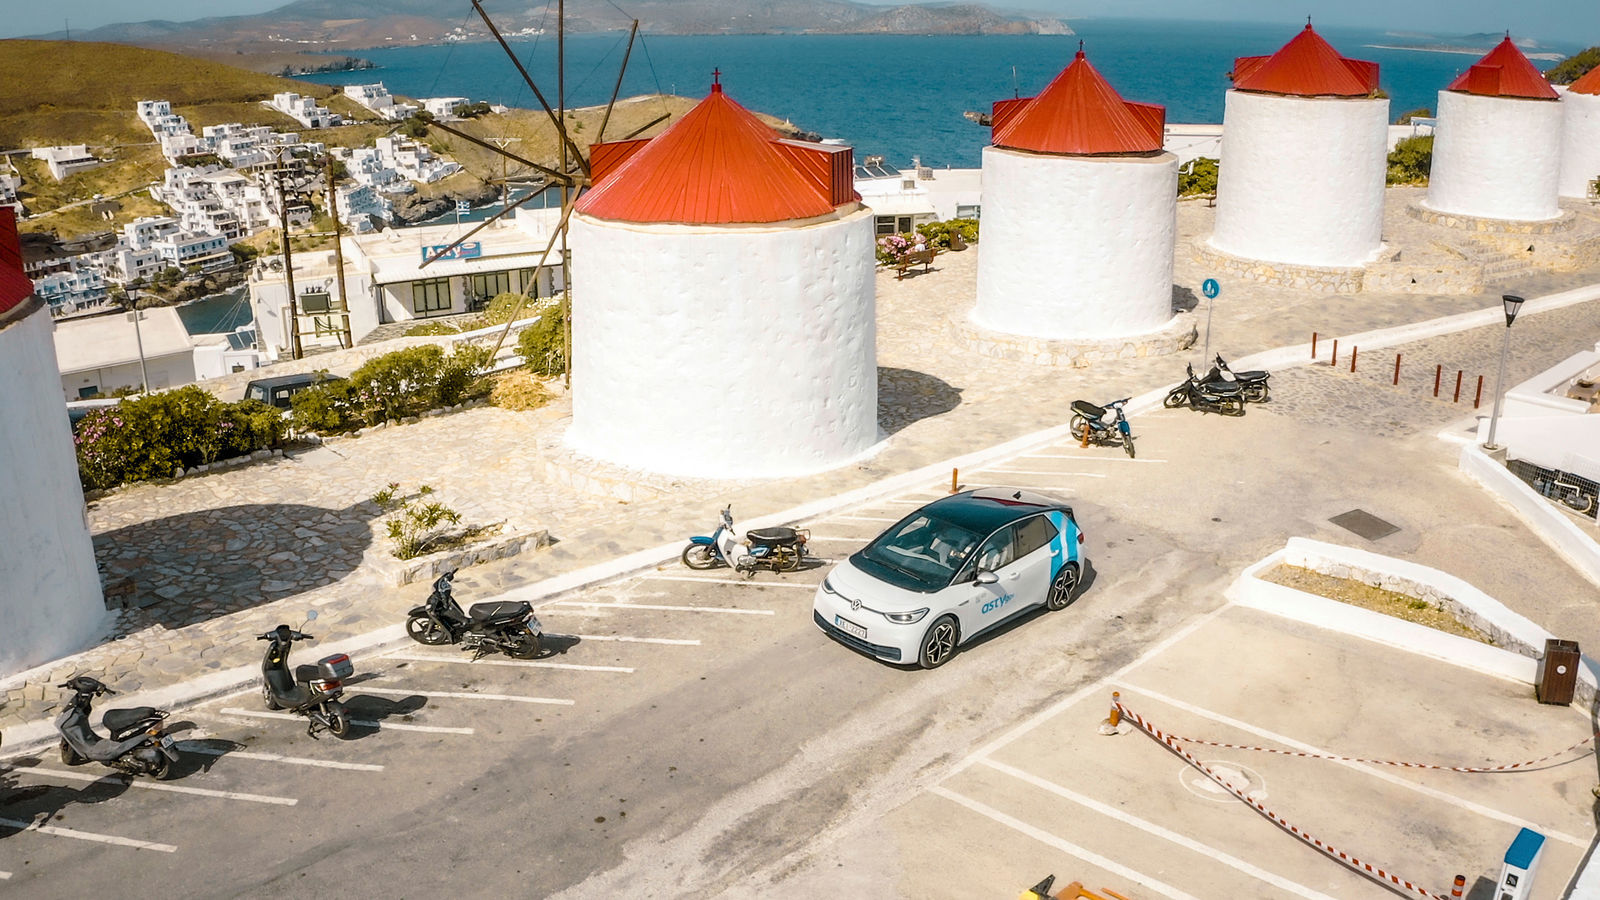 Volkswagen starts mobility services on Astypalea, marking next step in Greek island’s electrification